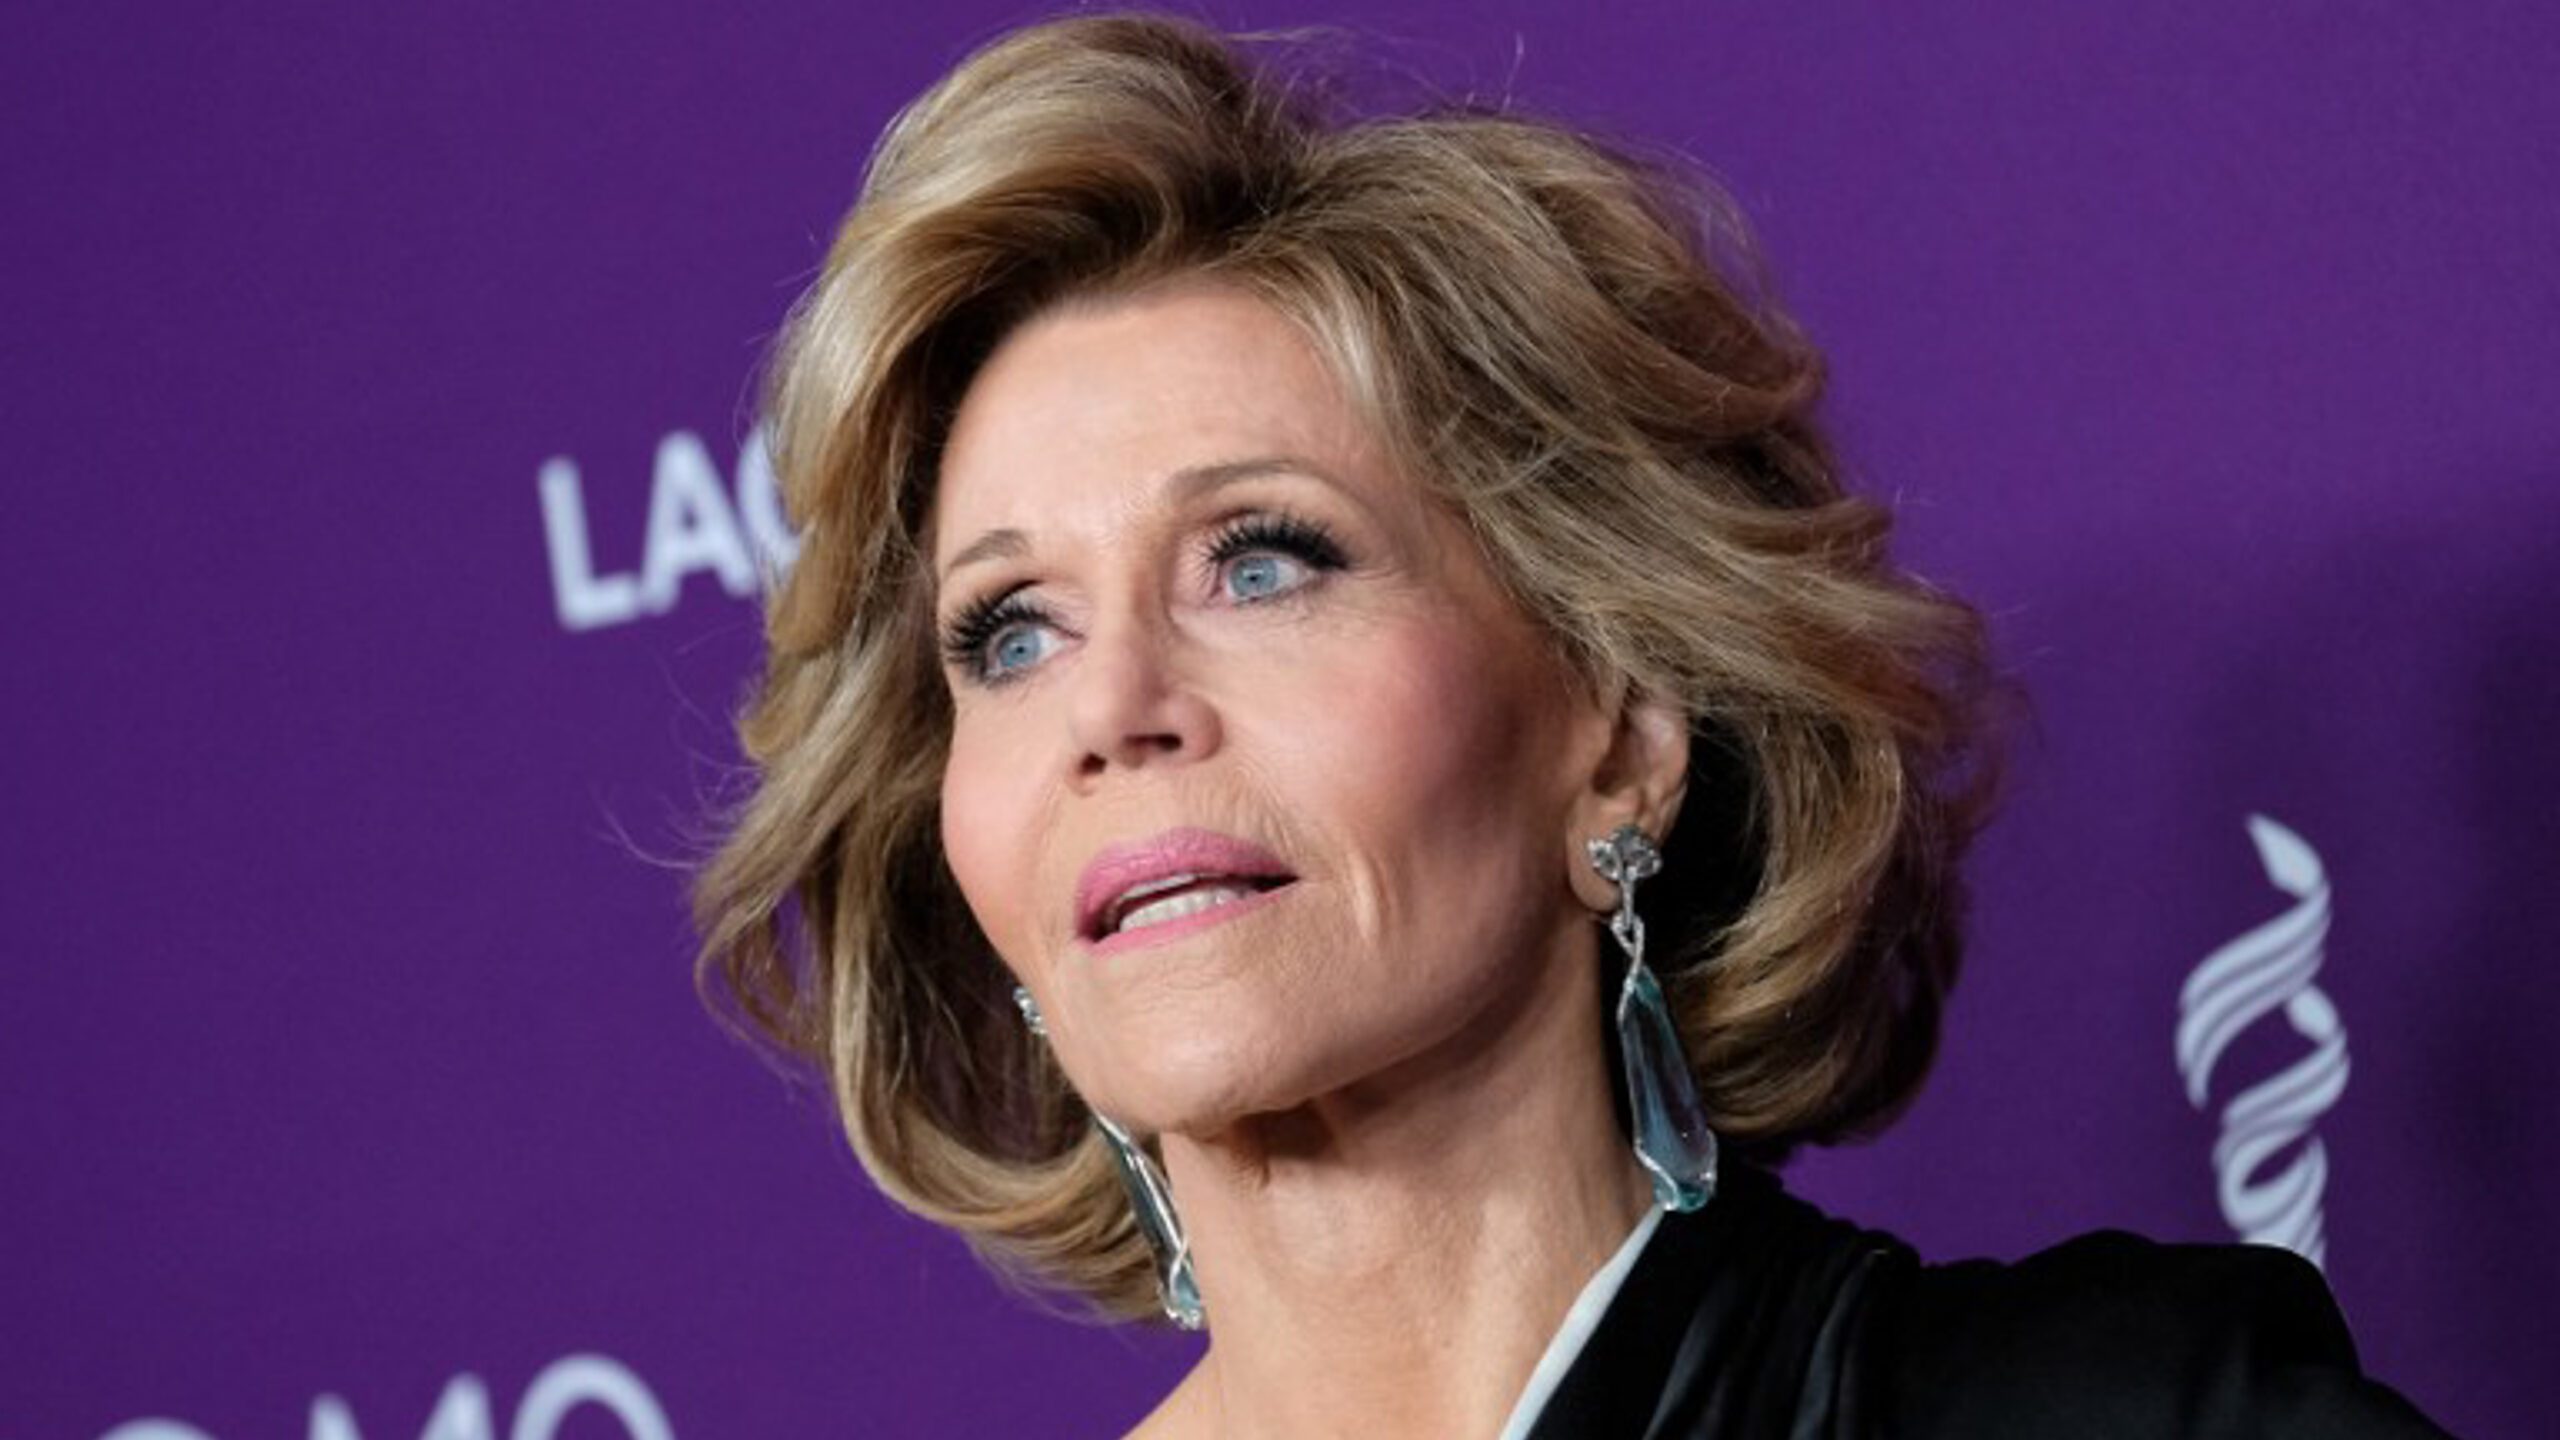 Jane Fonda reveals she was raped and abused as a child